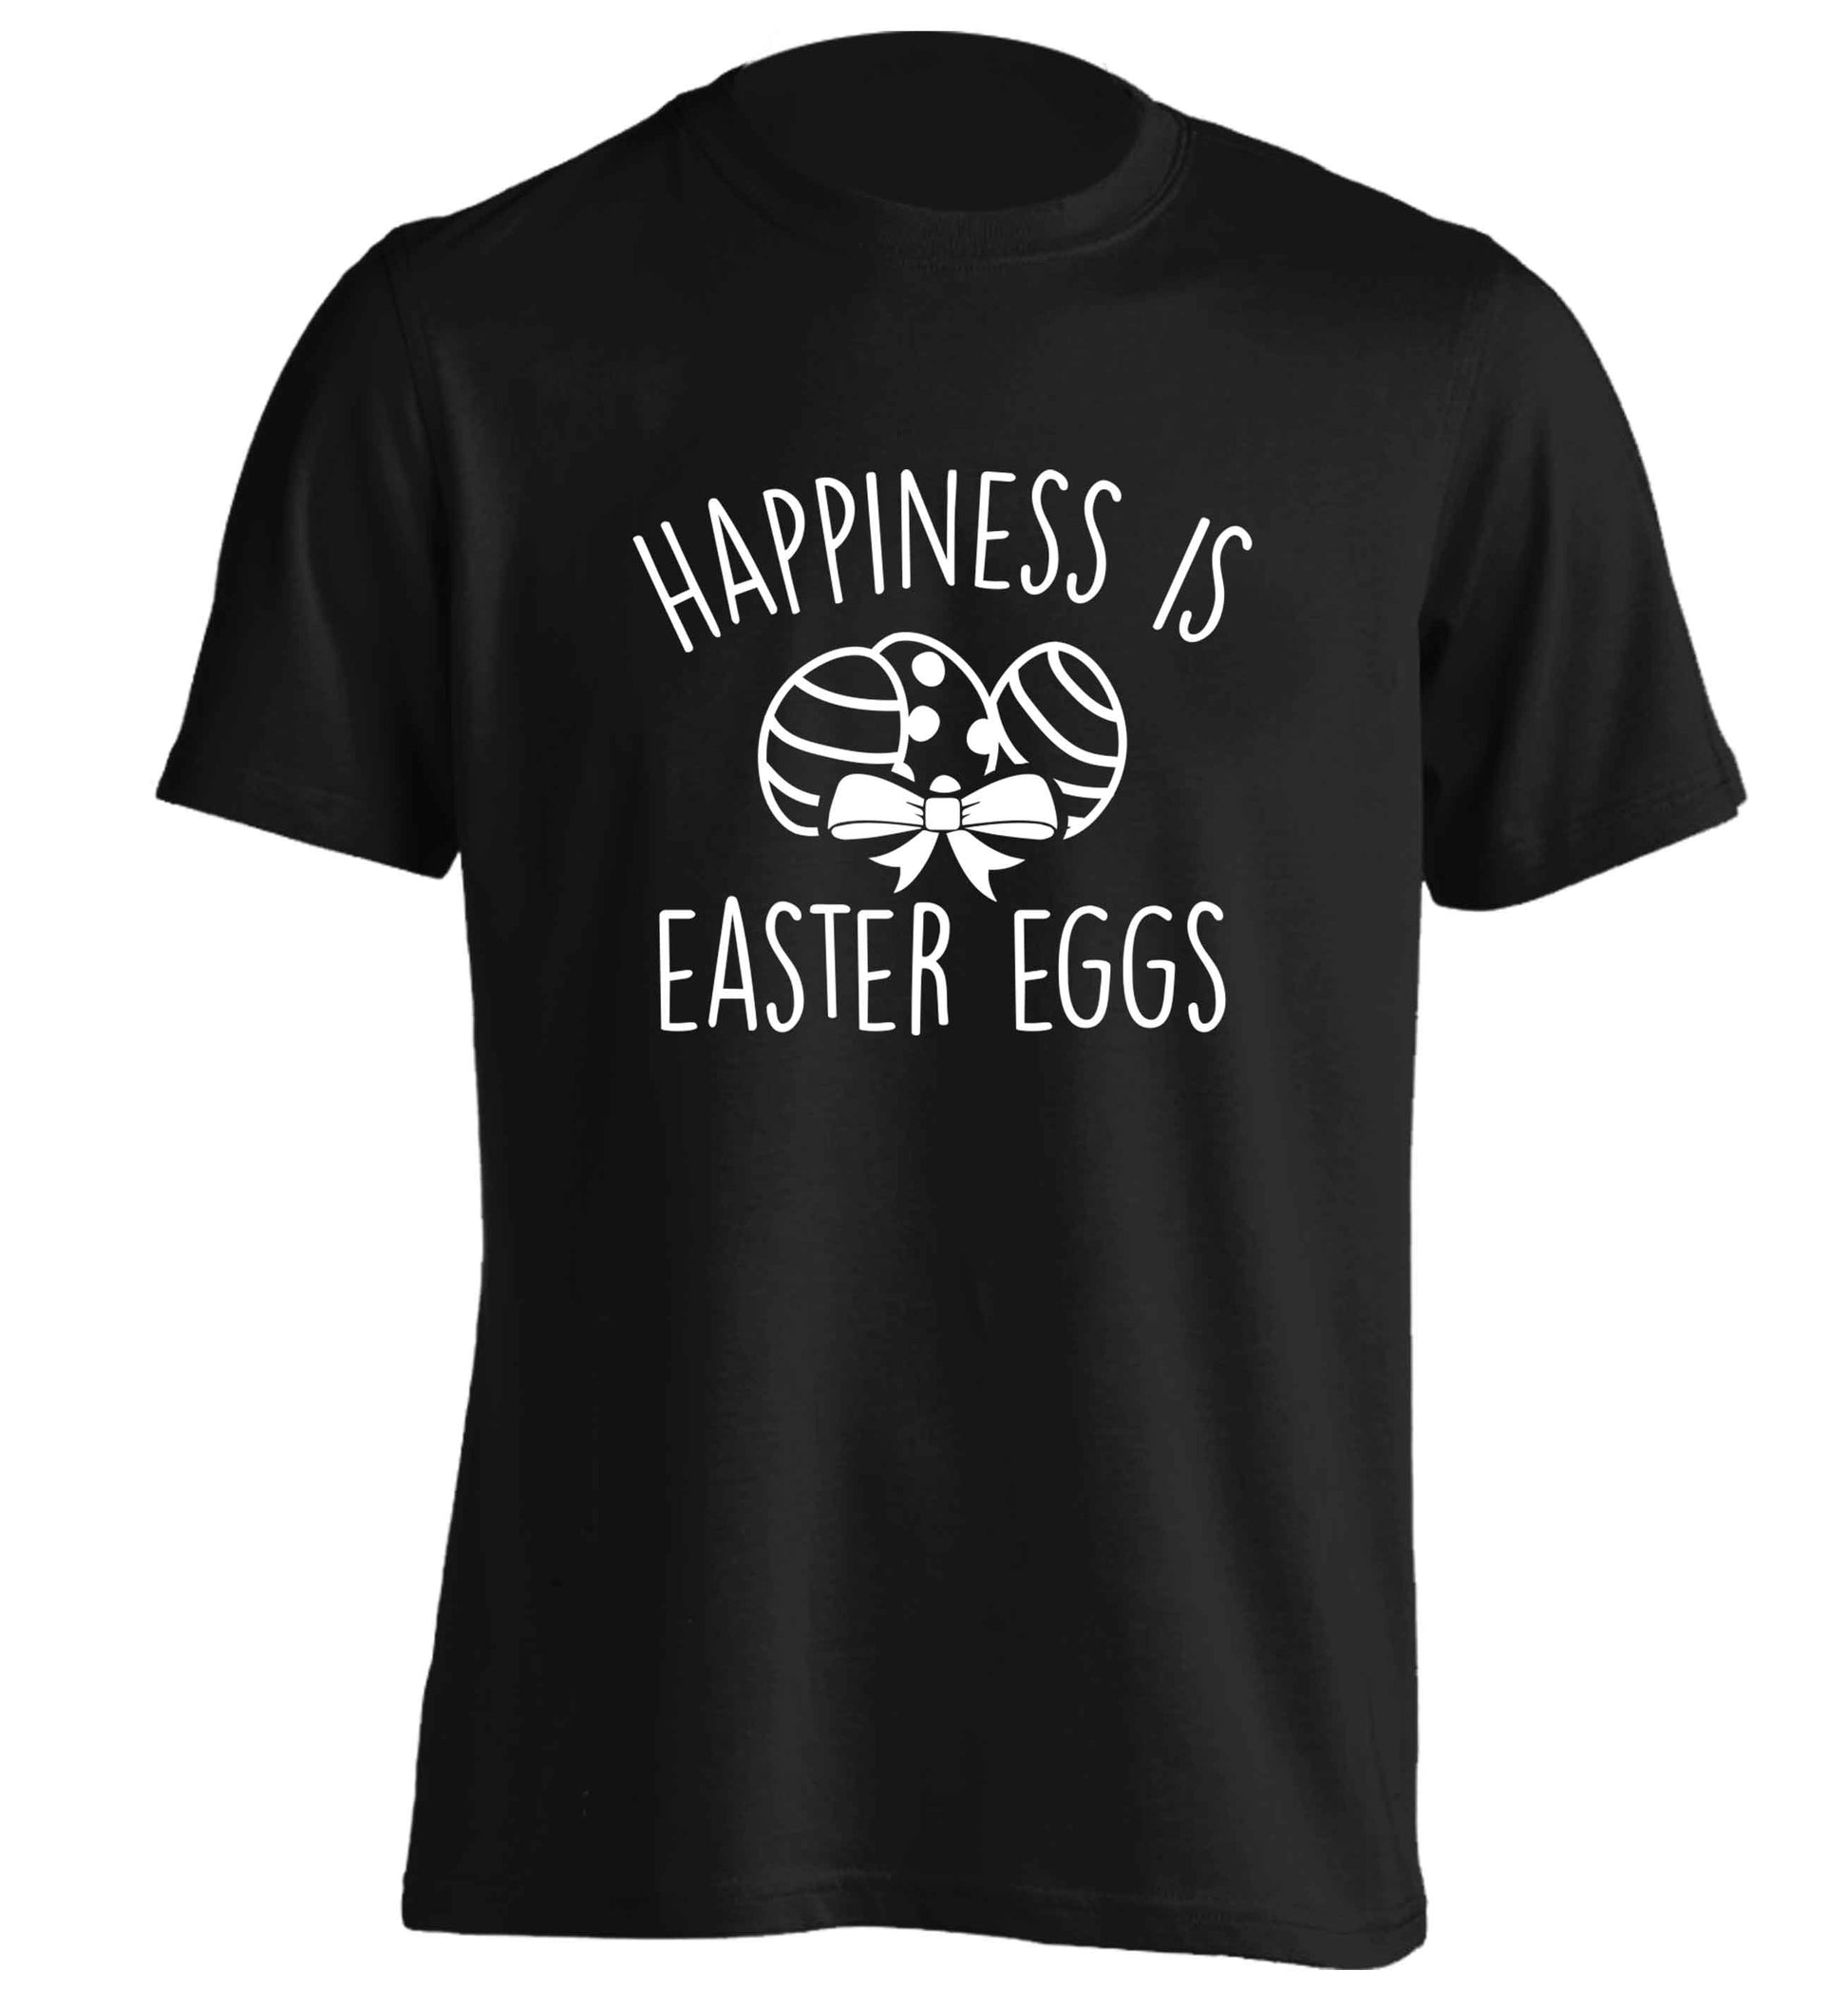 Happiness is Easter eggs adults unisex black Tshirt 2XL